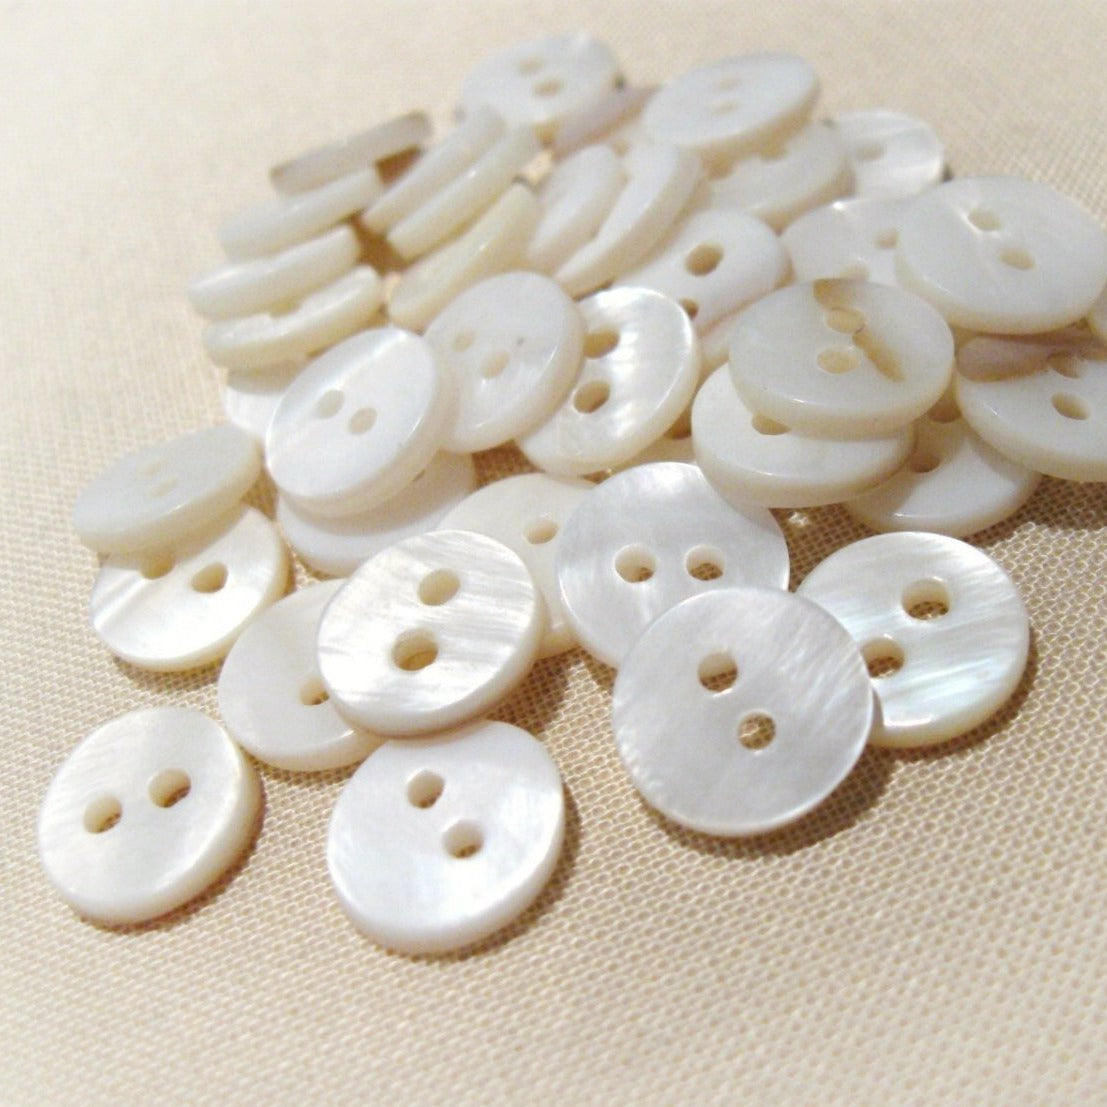 Mother of Pearl Shell Buttons 10mm - set of 10 eco friendly natural buttons